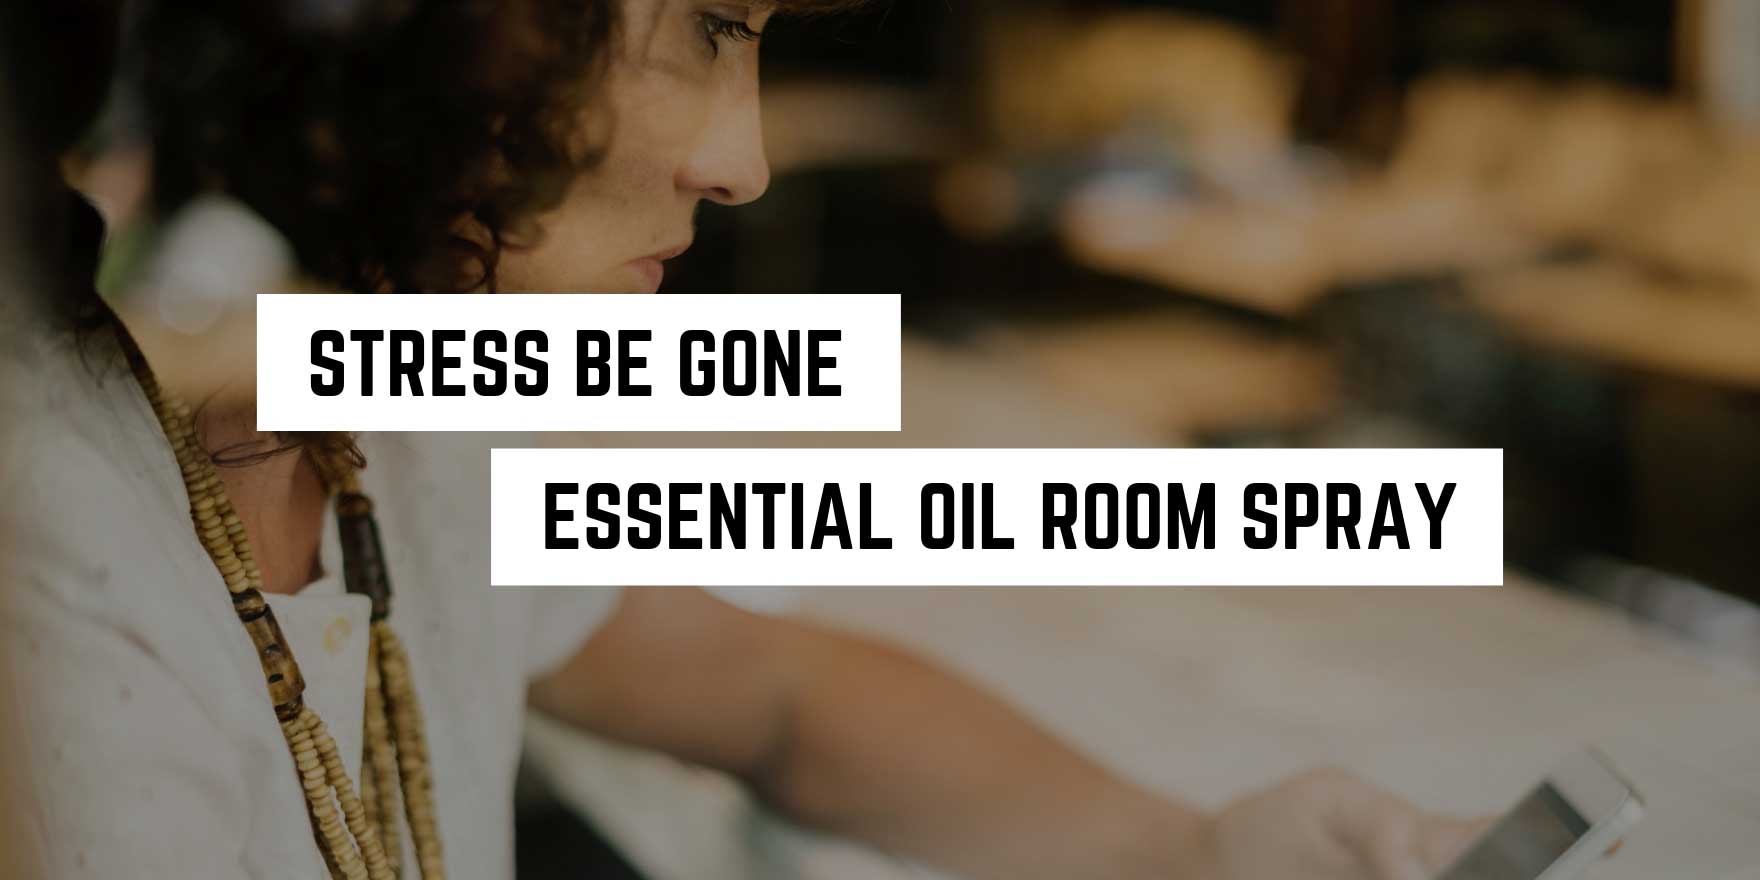 Woman concentrating on her phone in a serene setting, with a caption promoting a witchy essential oil room spray for stress relief.